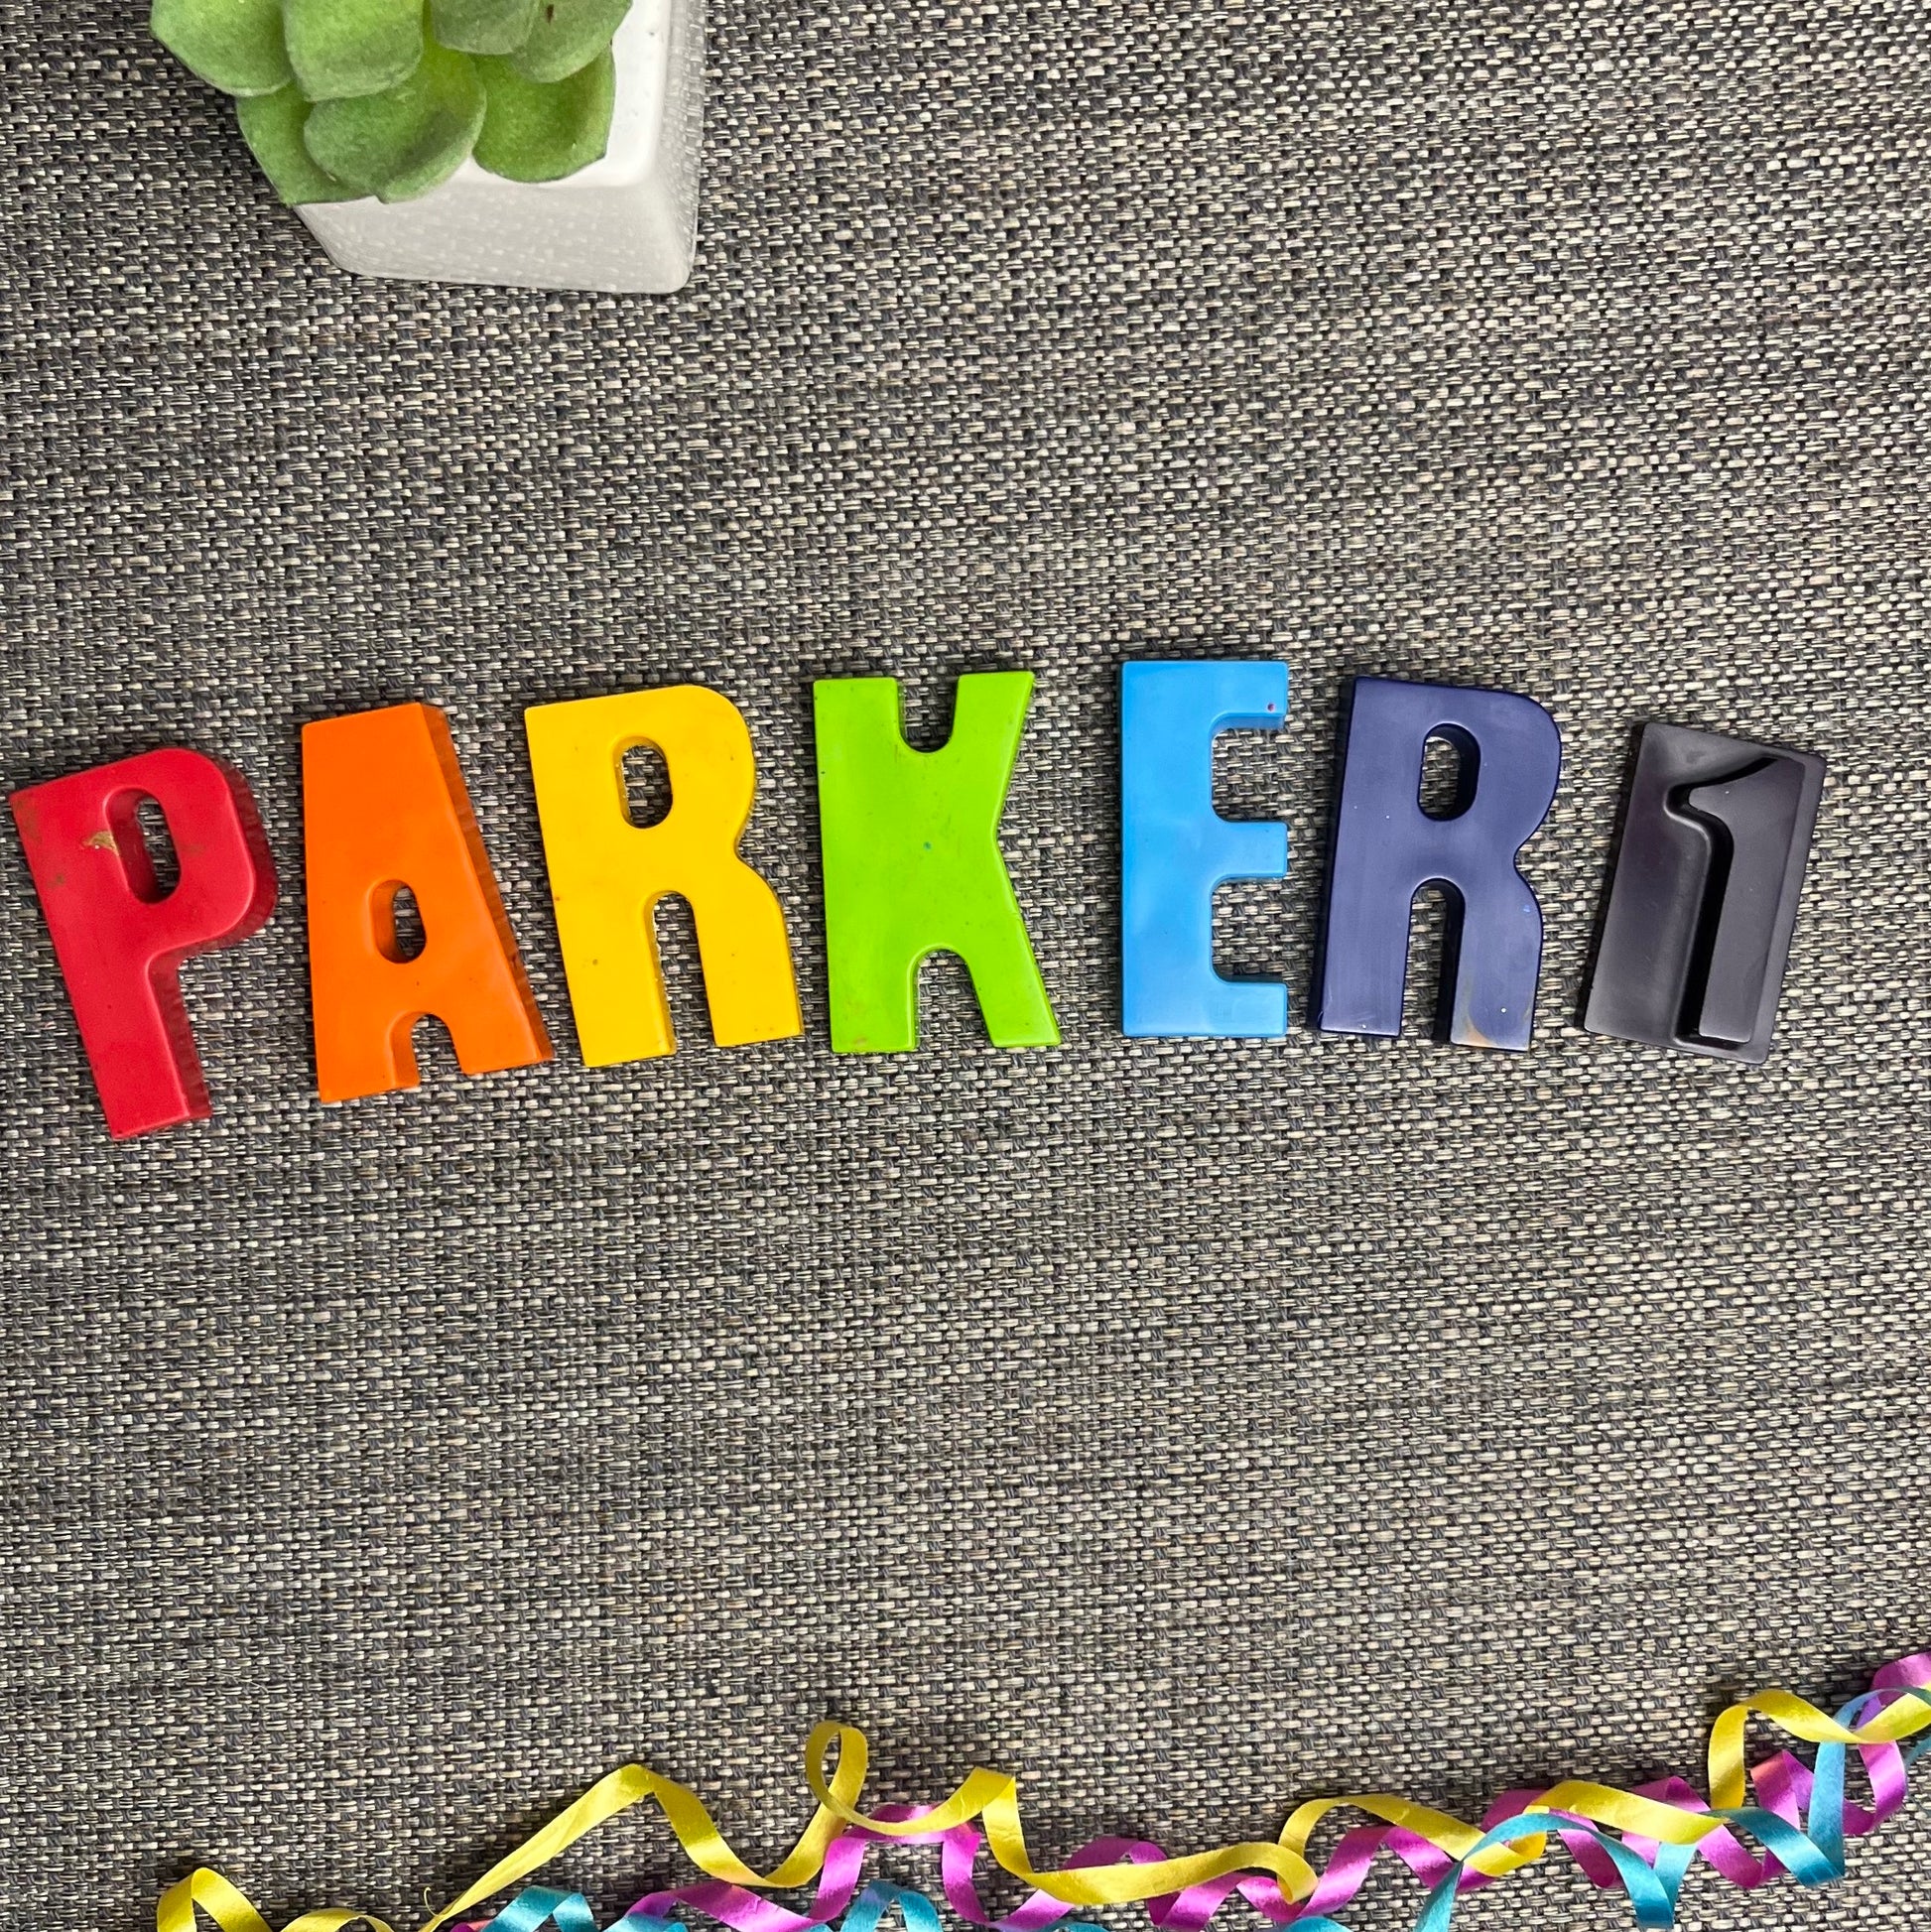 Letters for Parker1 made out of crayons with rainbow colours. P is red, A is orange, R is yellow, K is green, E is blue, R is dark blue and 1 is purple